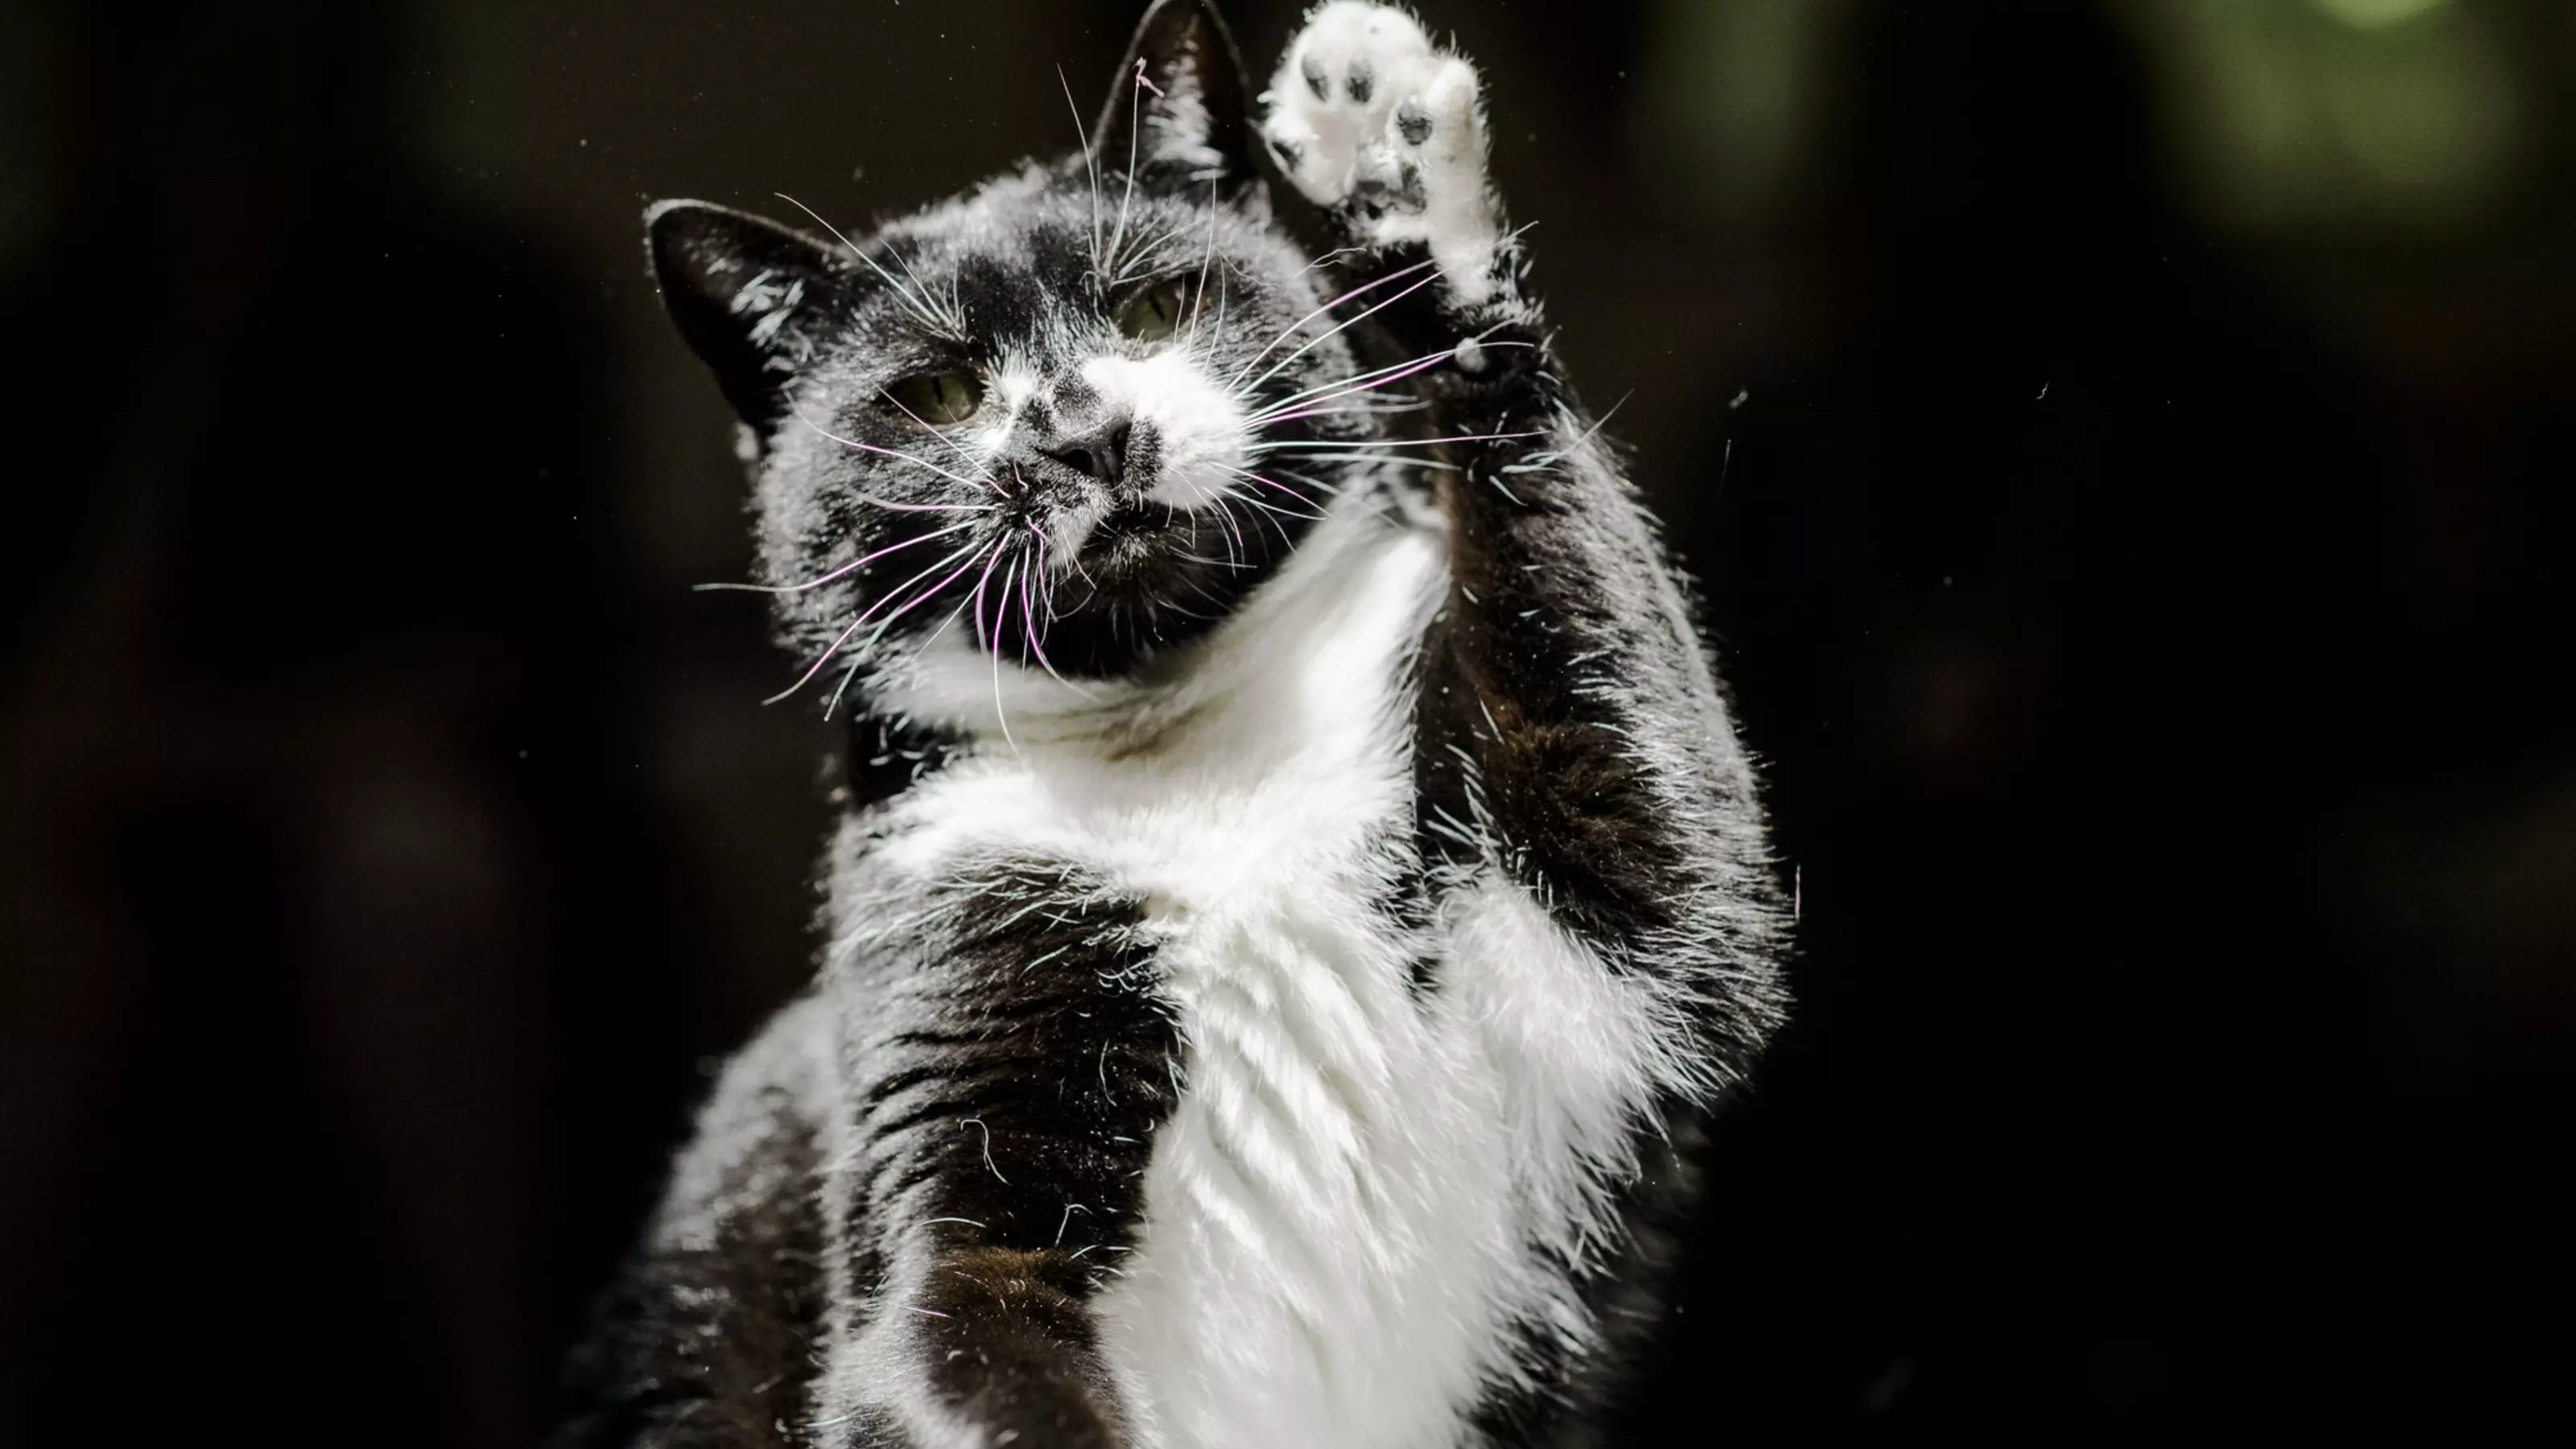 Black and white cat with one paw in the air